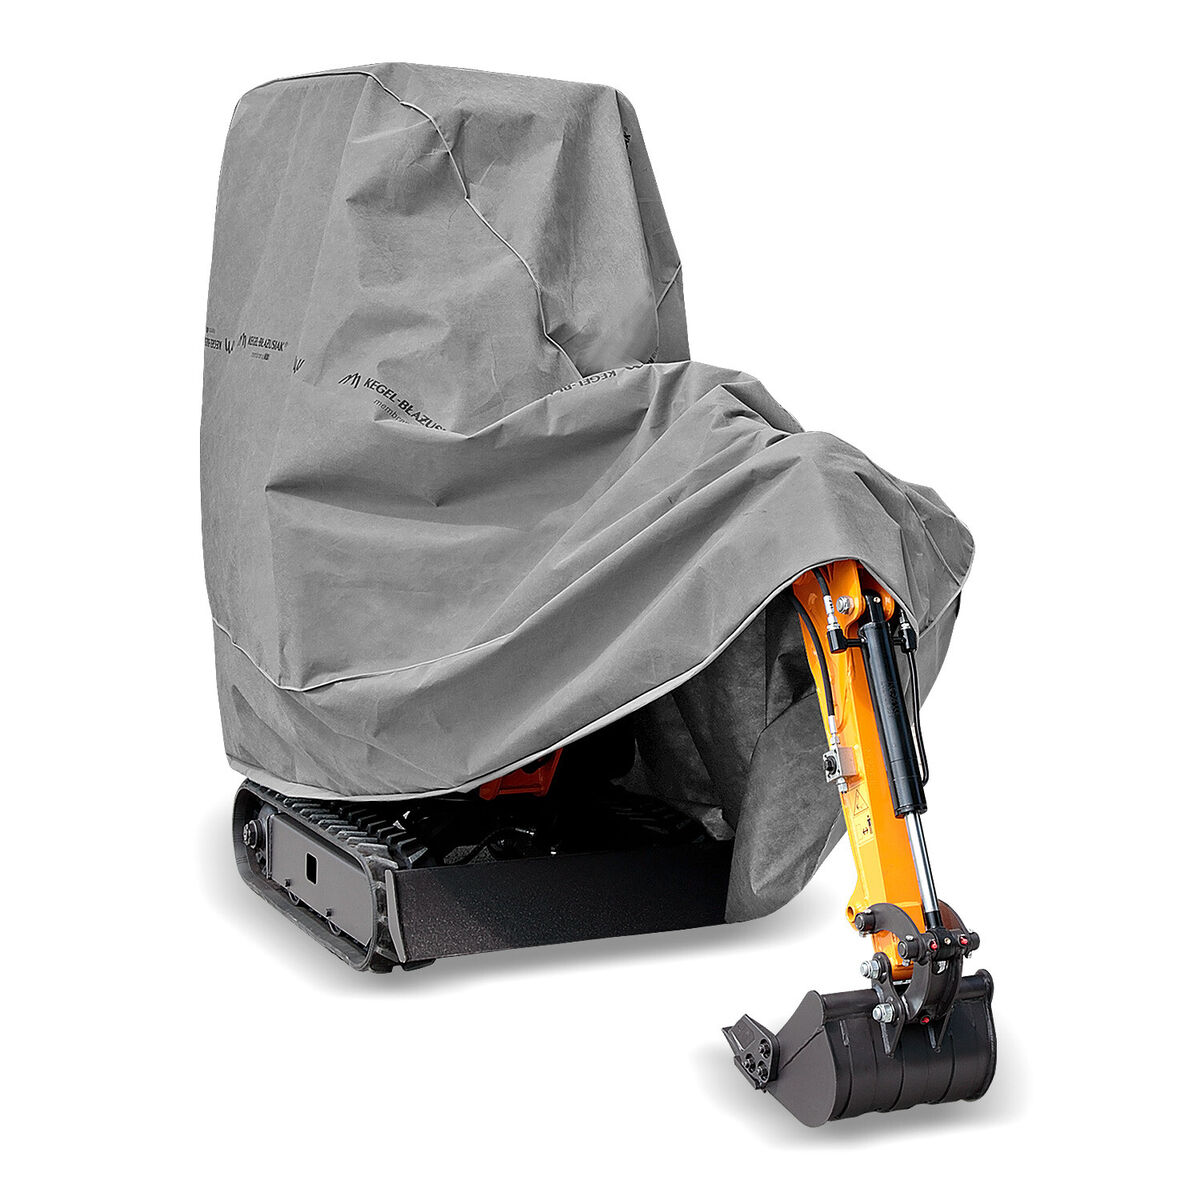 Waterproof full cover UV protection frost protection for mini excavators  800-160